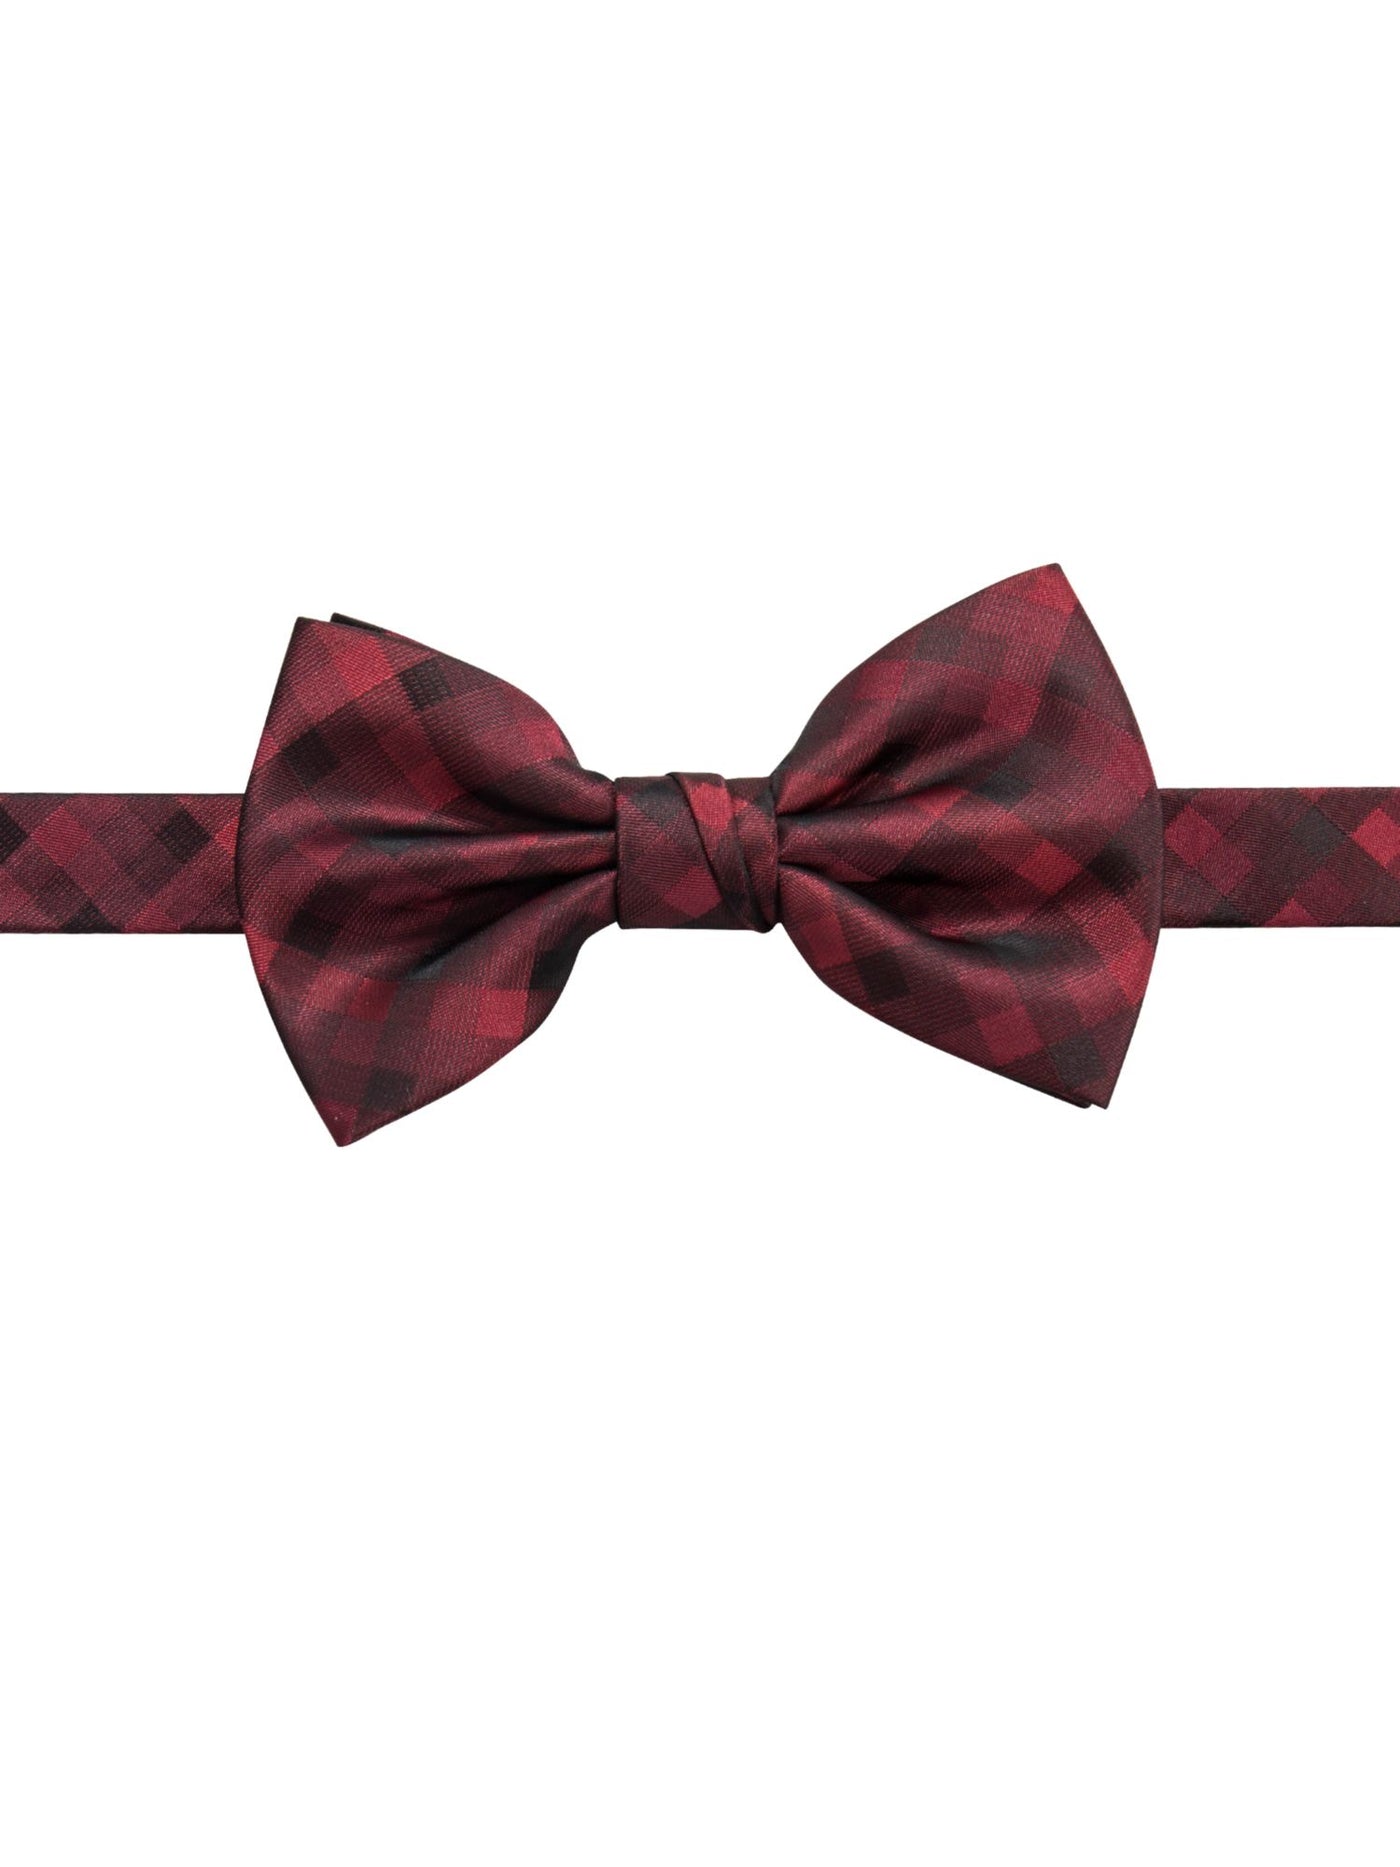 RYAN SEACREST Mens Red Aster Check Bow Tie